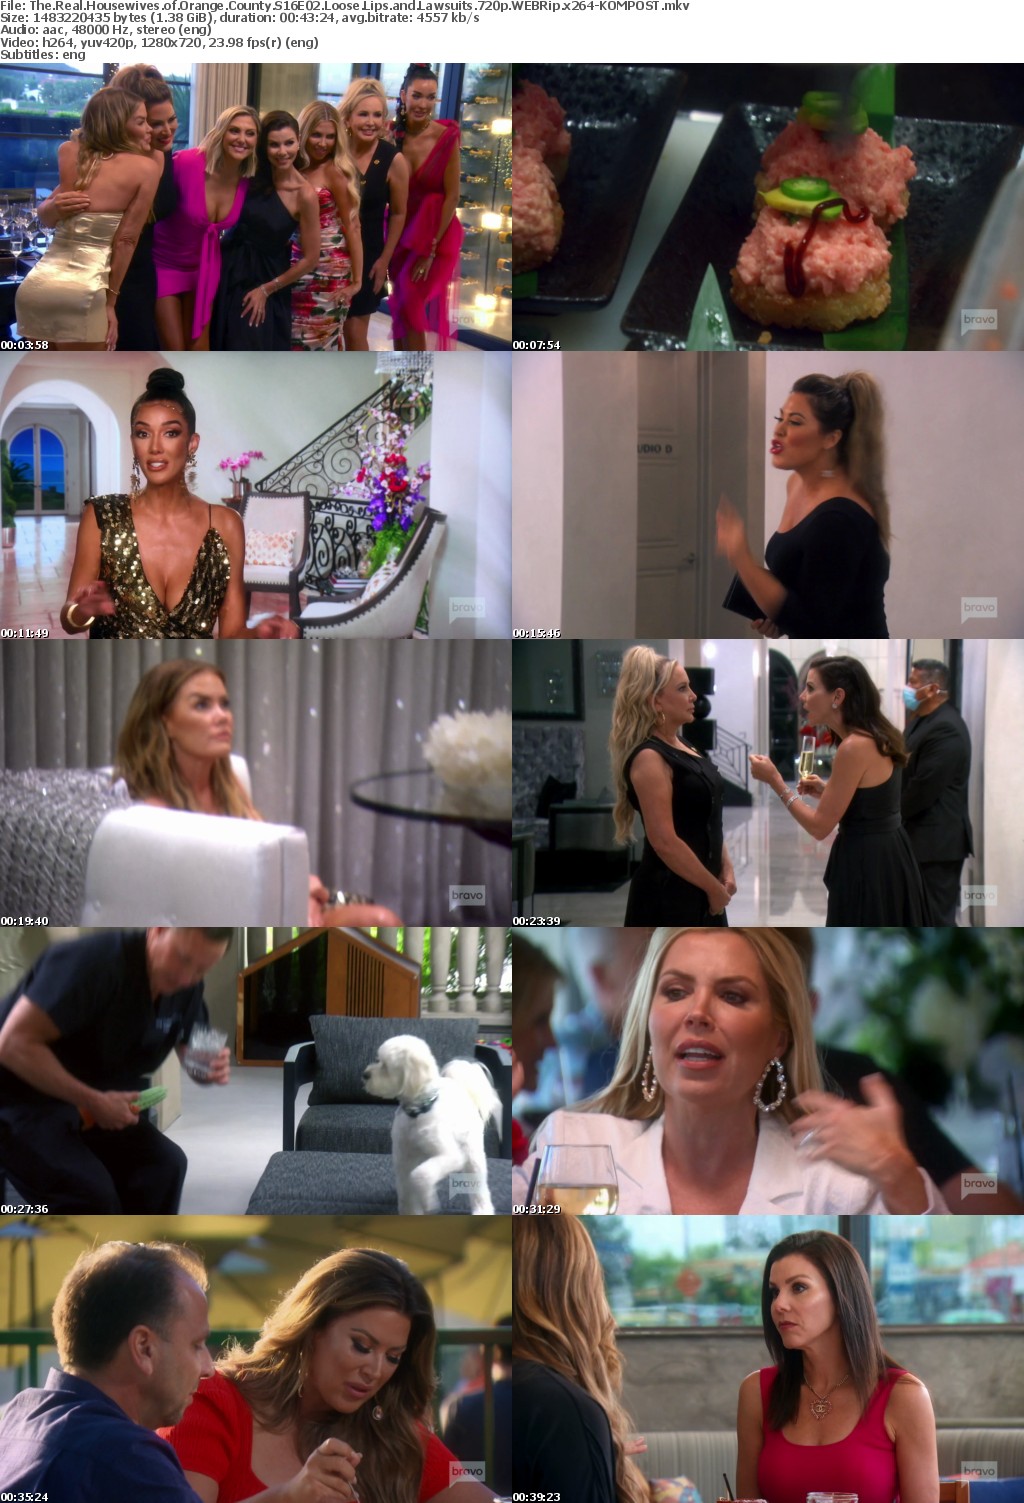 The Real Housewives of Orange County S16E02 Loose Lips and Lawsuits 720p WEBRip x264-KOMPOST